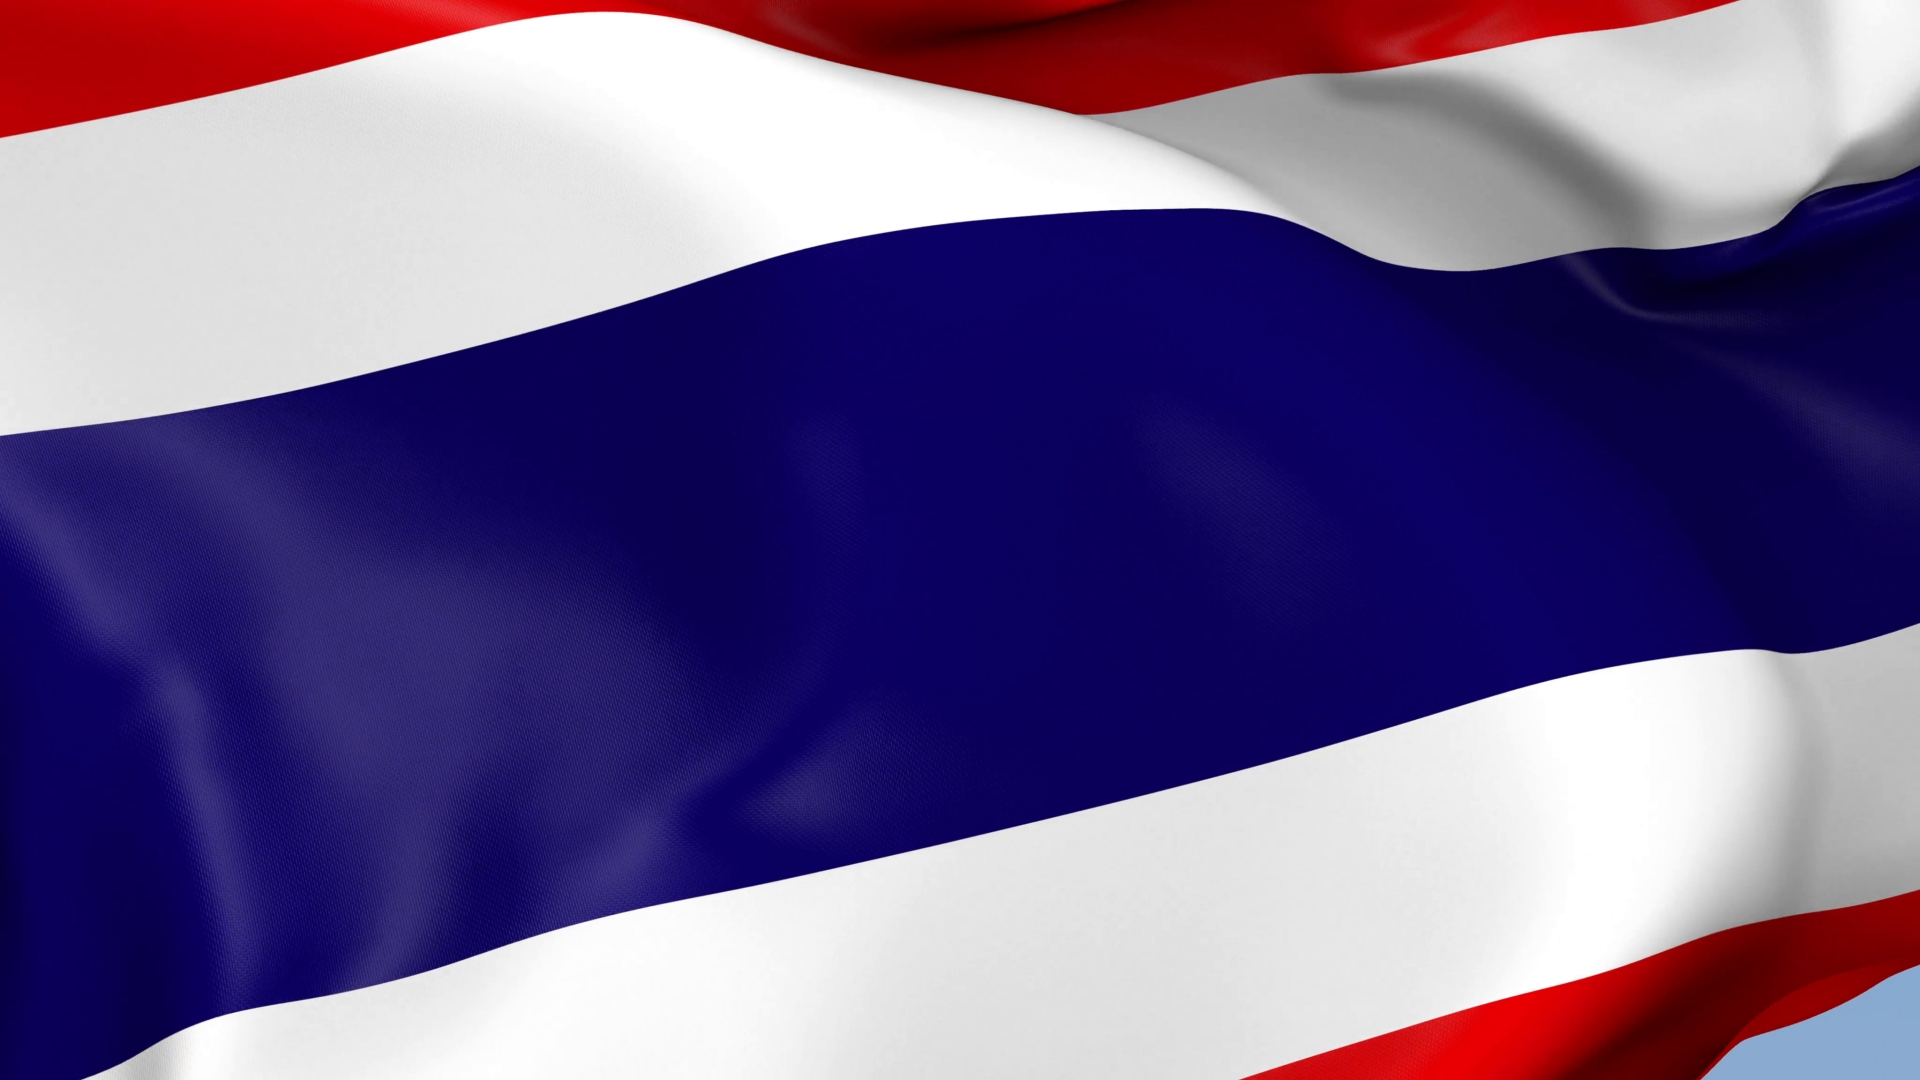 Thailand National Football Team Wallpapers